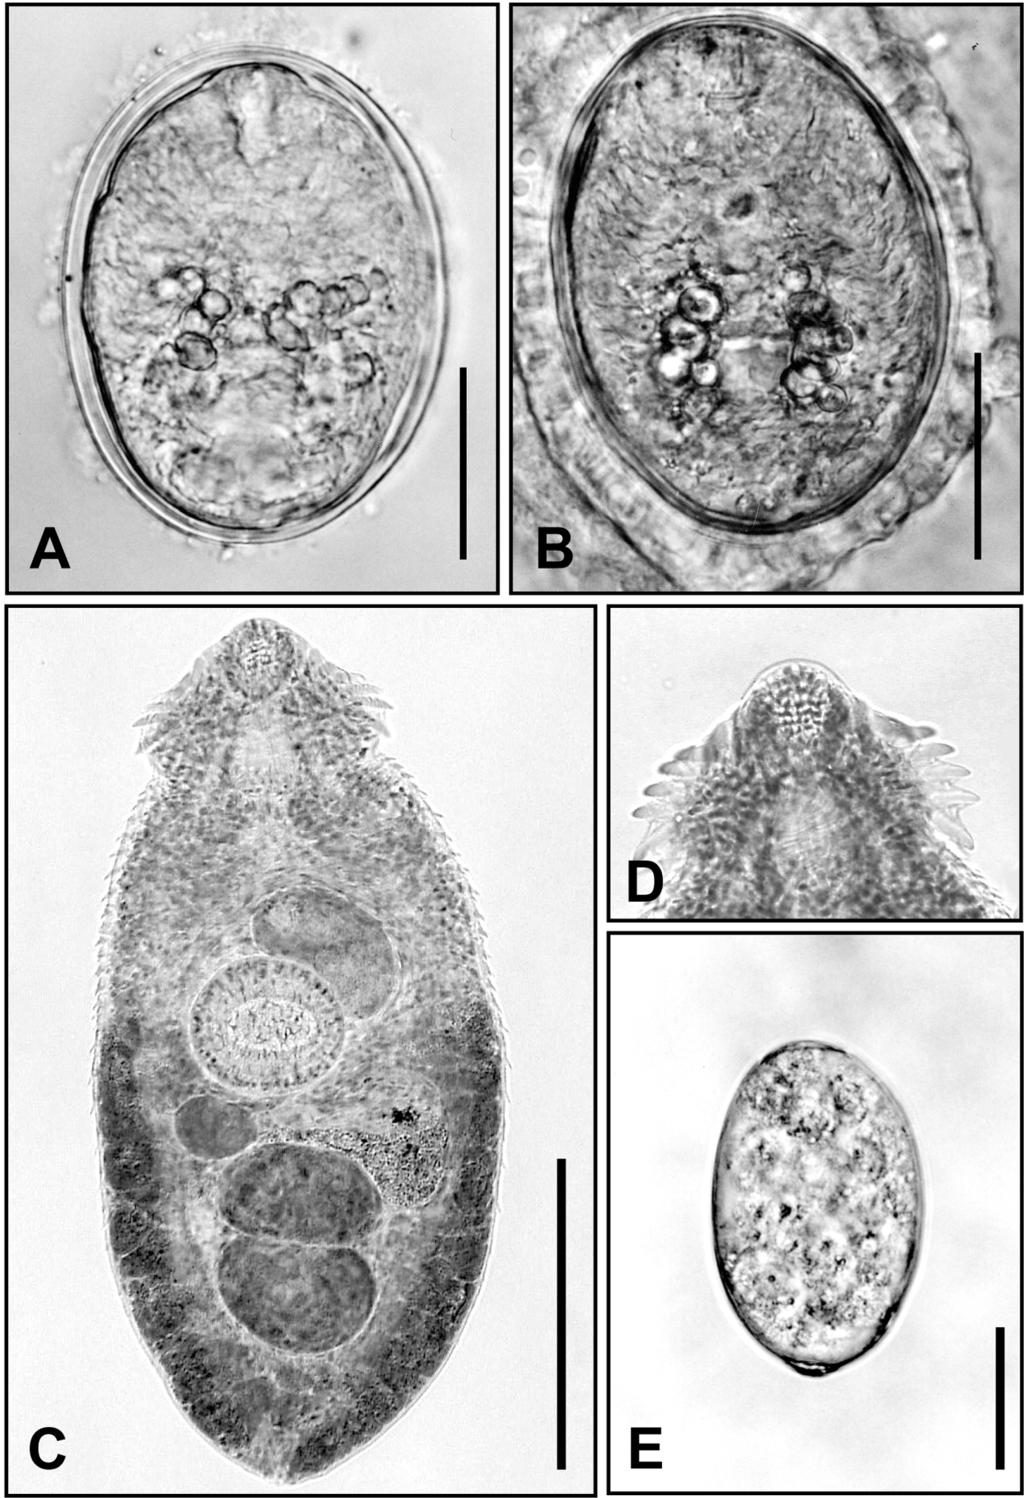 240 THE JOURNAL OF PARASITOLOGY, VOL. 92, NO. 2, APRIL 2006 FIGURE 4. Metacercariae and an adult recovered from experimentally infected fishes and rats, respectively.